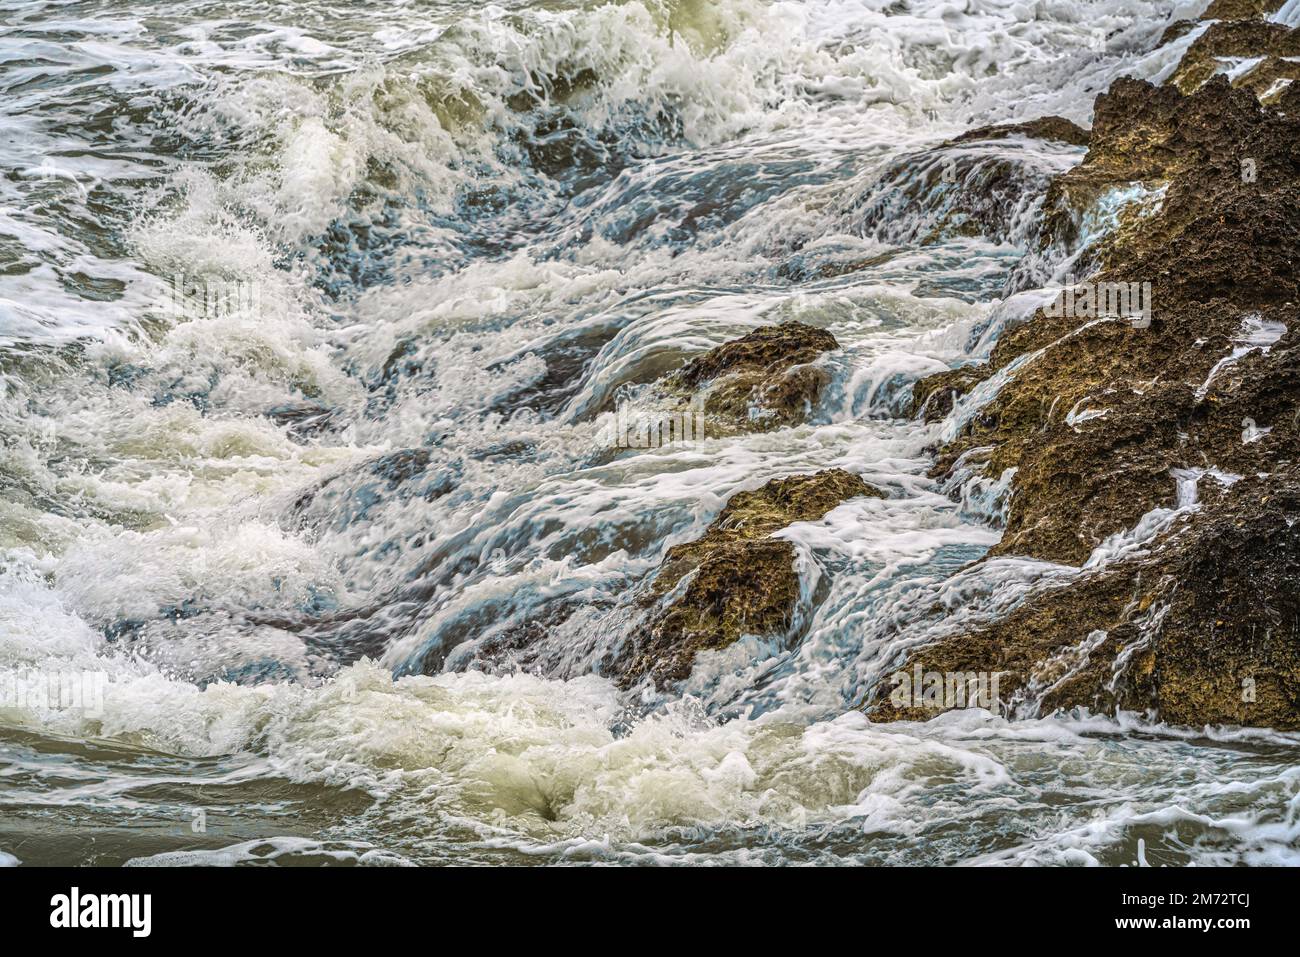 The waves of the rough sea after days of rain and wind crash against the rocky coasts of the Gargano in Puglia. Puglia, Italy, Europe Stock Photo